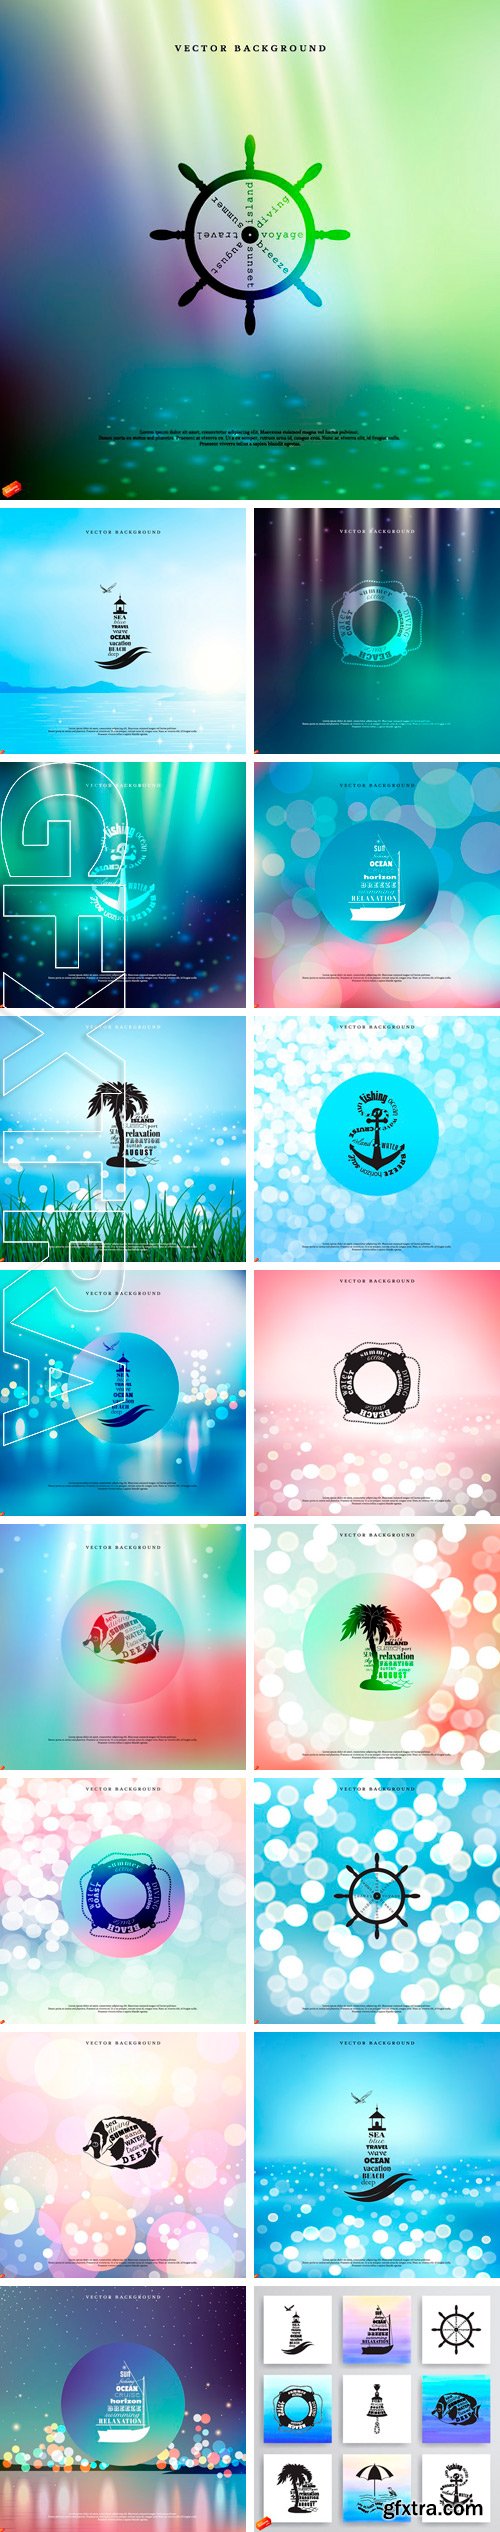 Stock Vectors - Vector blurred background. Marine style